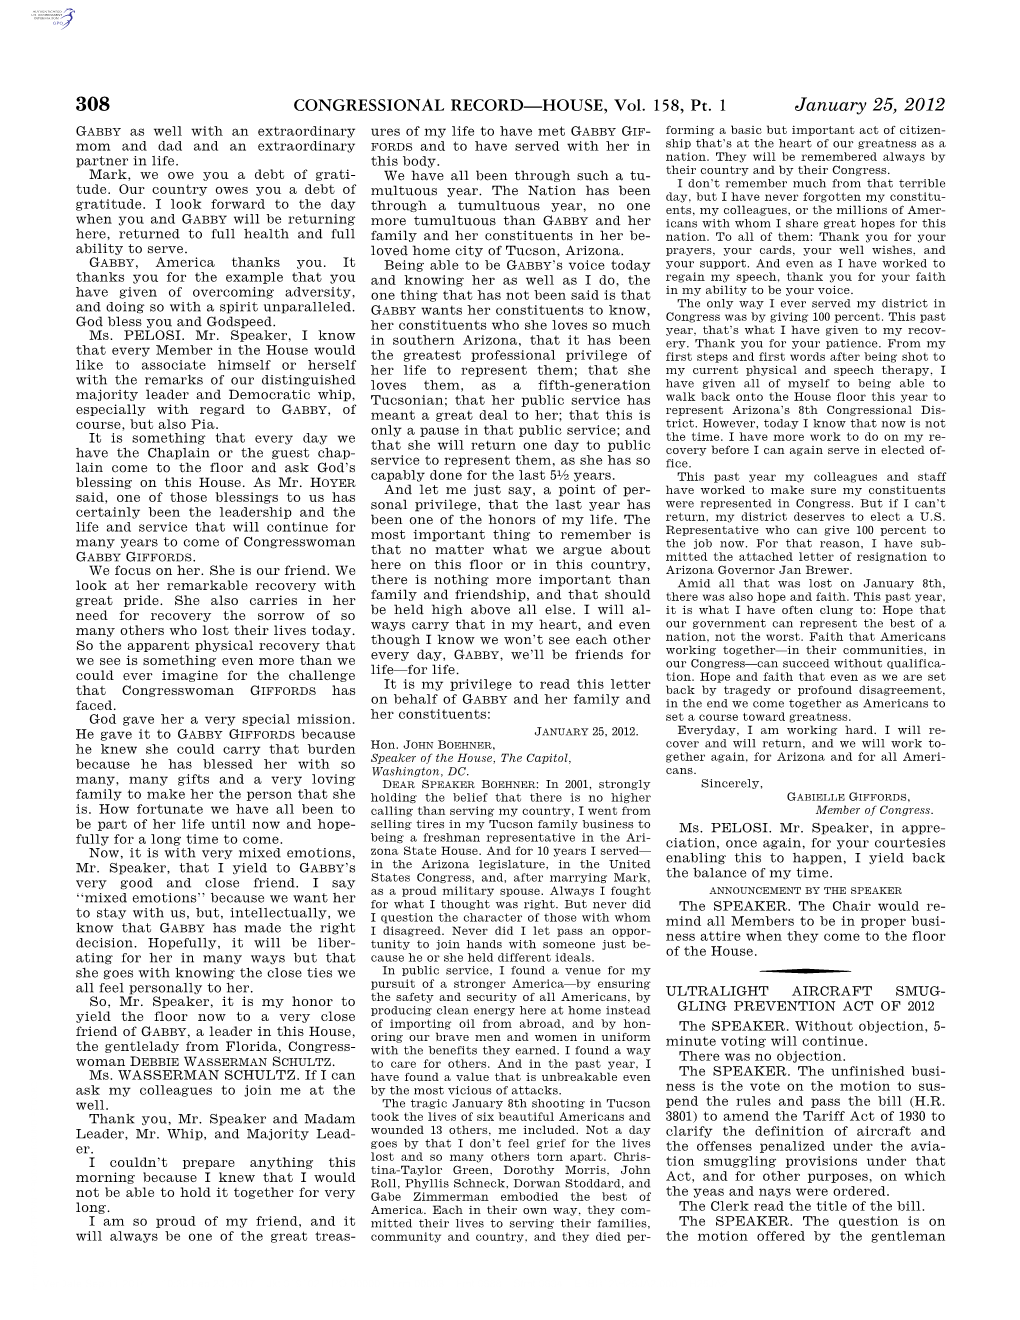 CONGRESSIONAL RECORD—HOUSE, Vol. 158, Pt. 1 January 25, 2012